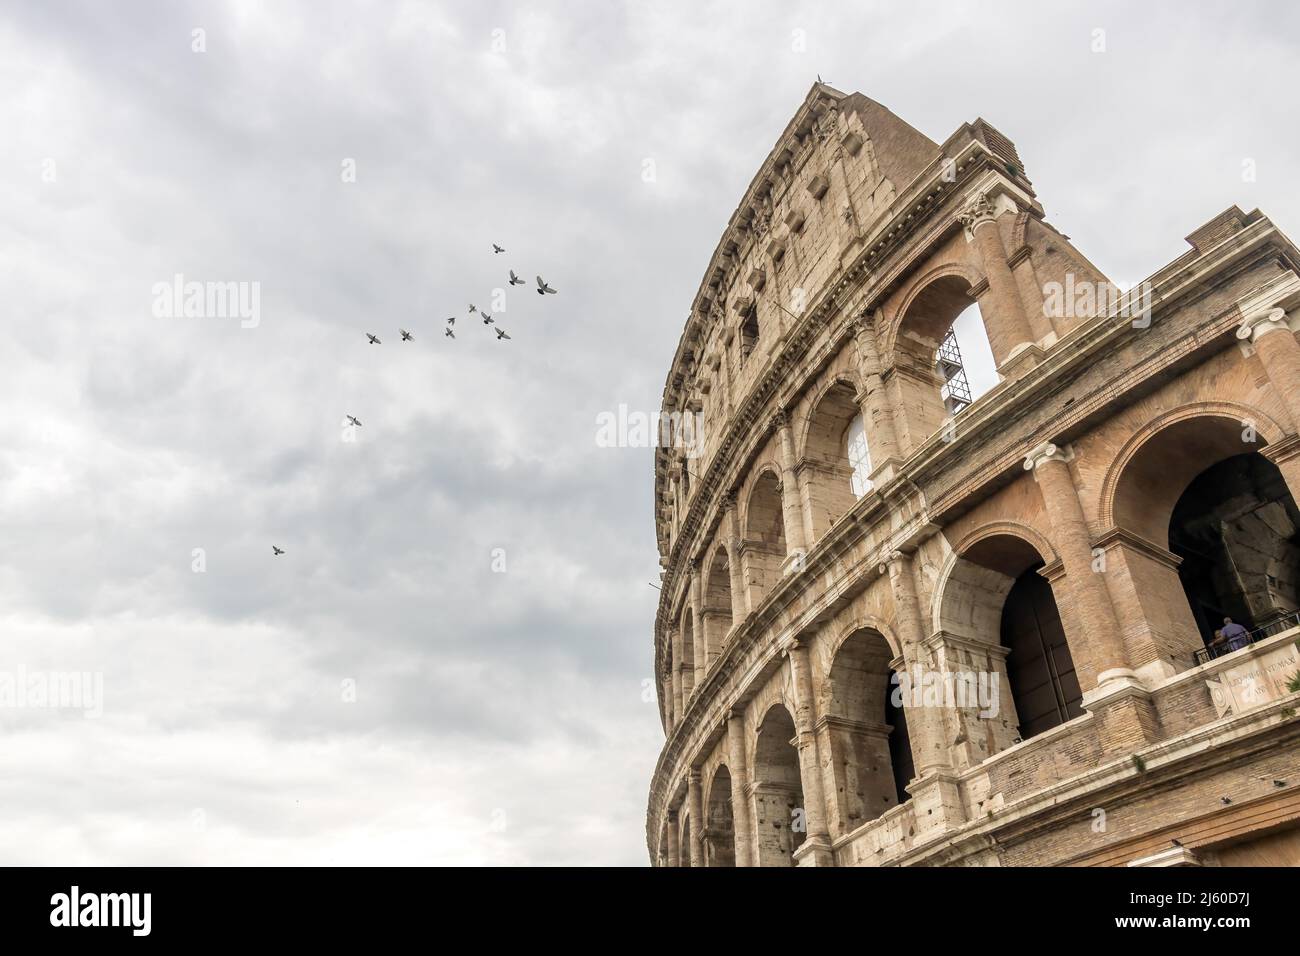 Roman Colosseum at Day under cloudy skies in City of Rome, Italy 03 Stock Photo